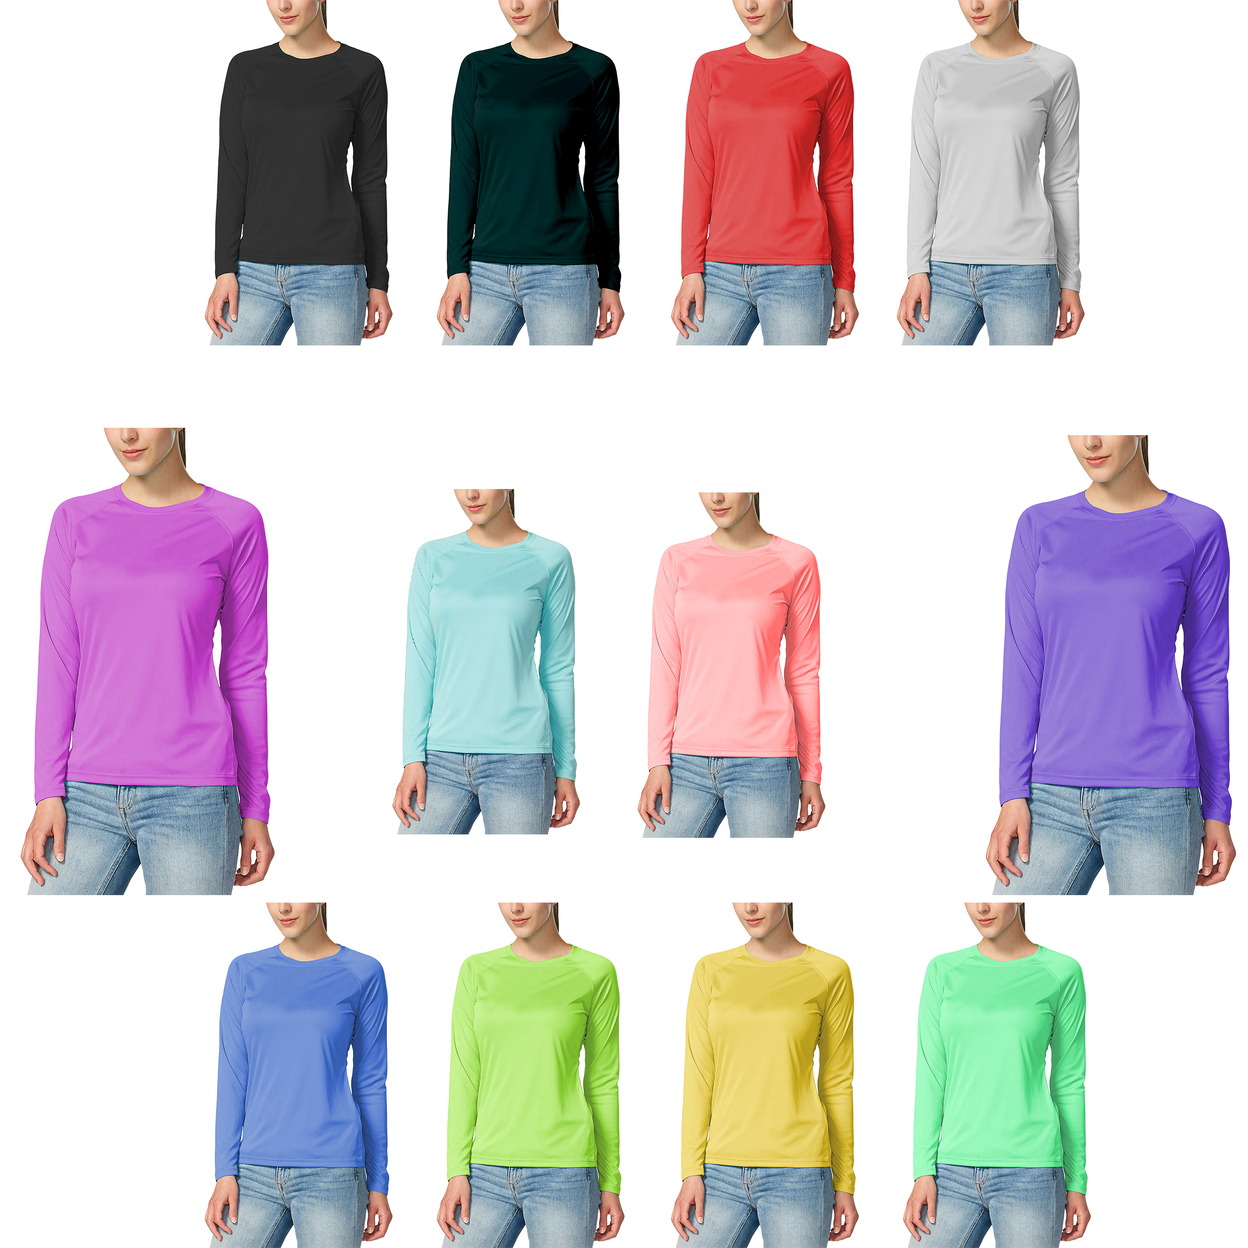 3-Pack: Women's Dri-Fit Moisture-Wicking Breathable Long Sleeve T-Shirt - Large